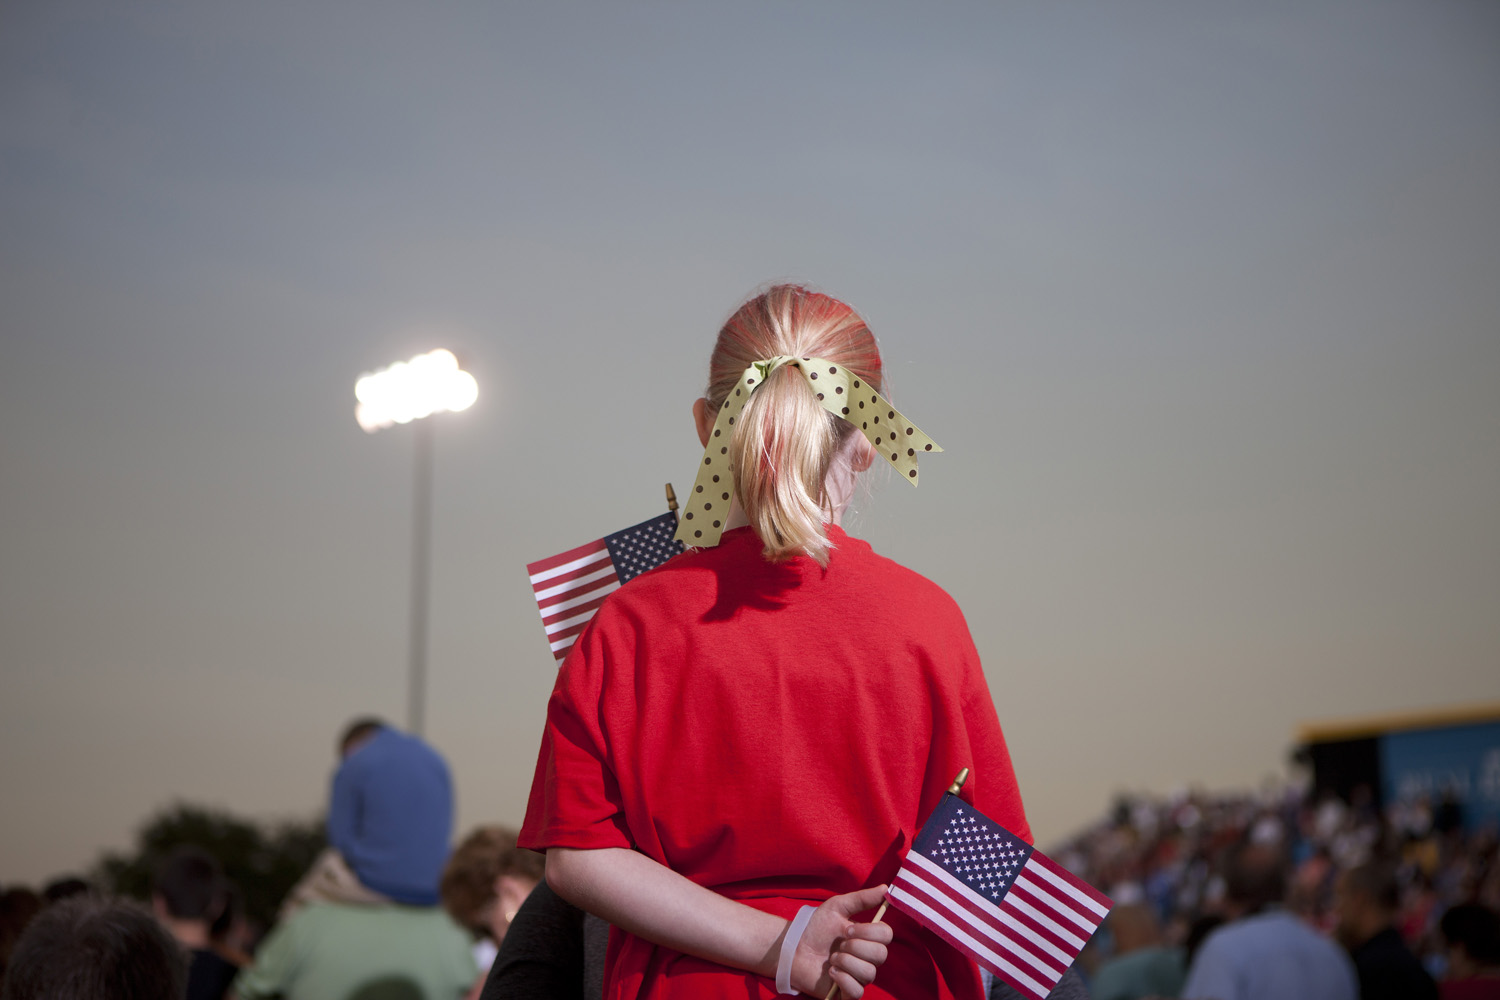 Image: Oct. 27, 2012. A red-clad Romney supporter clutches two American flags during a rally at a football stadium in Land O’ Lakes, Fla.